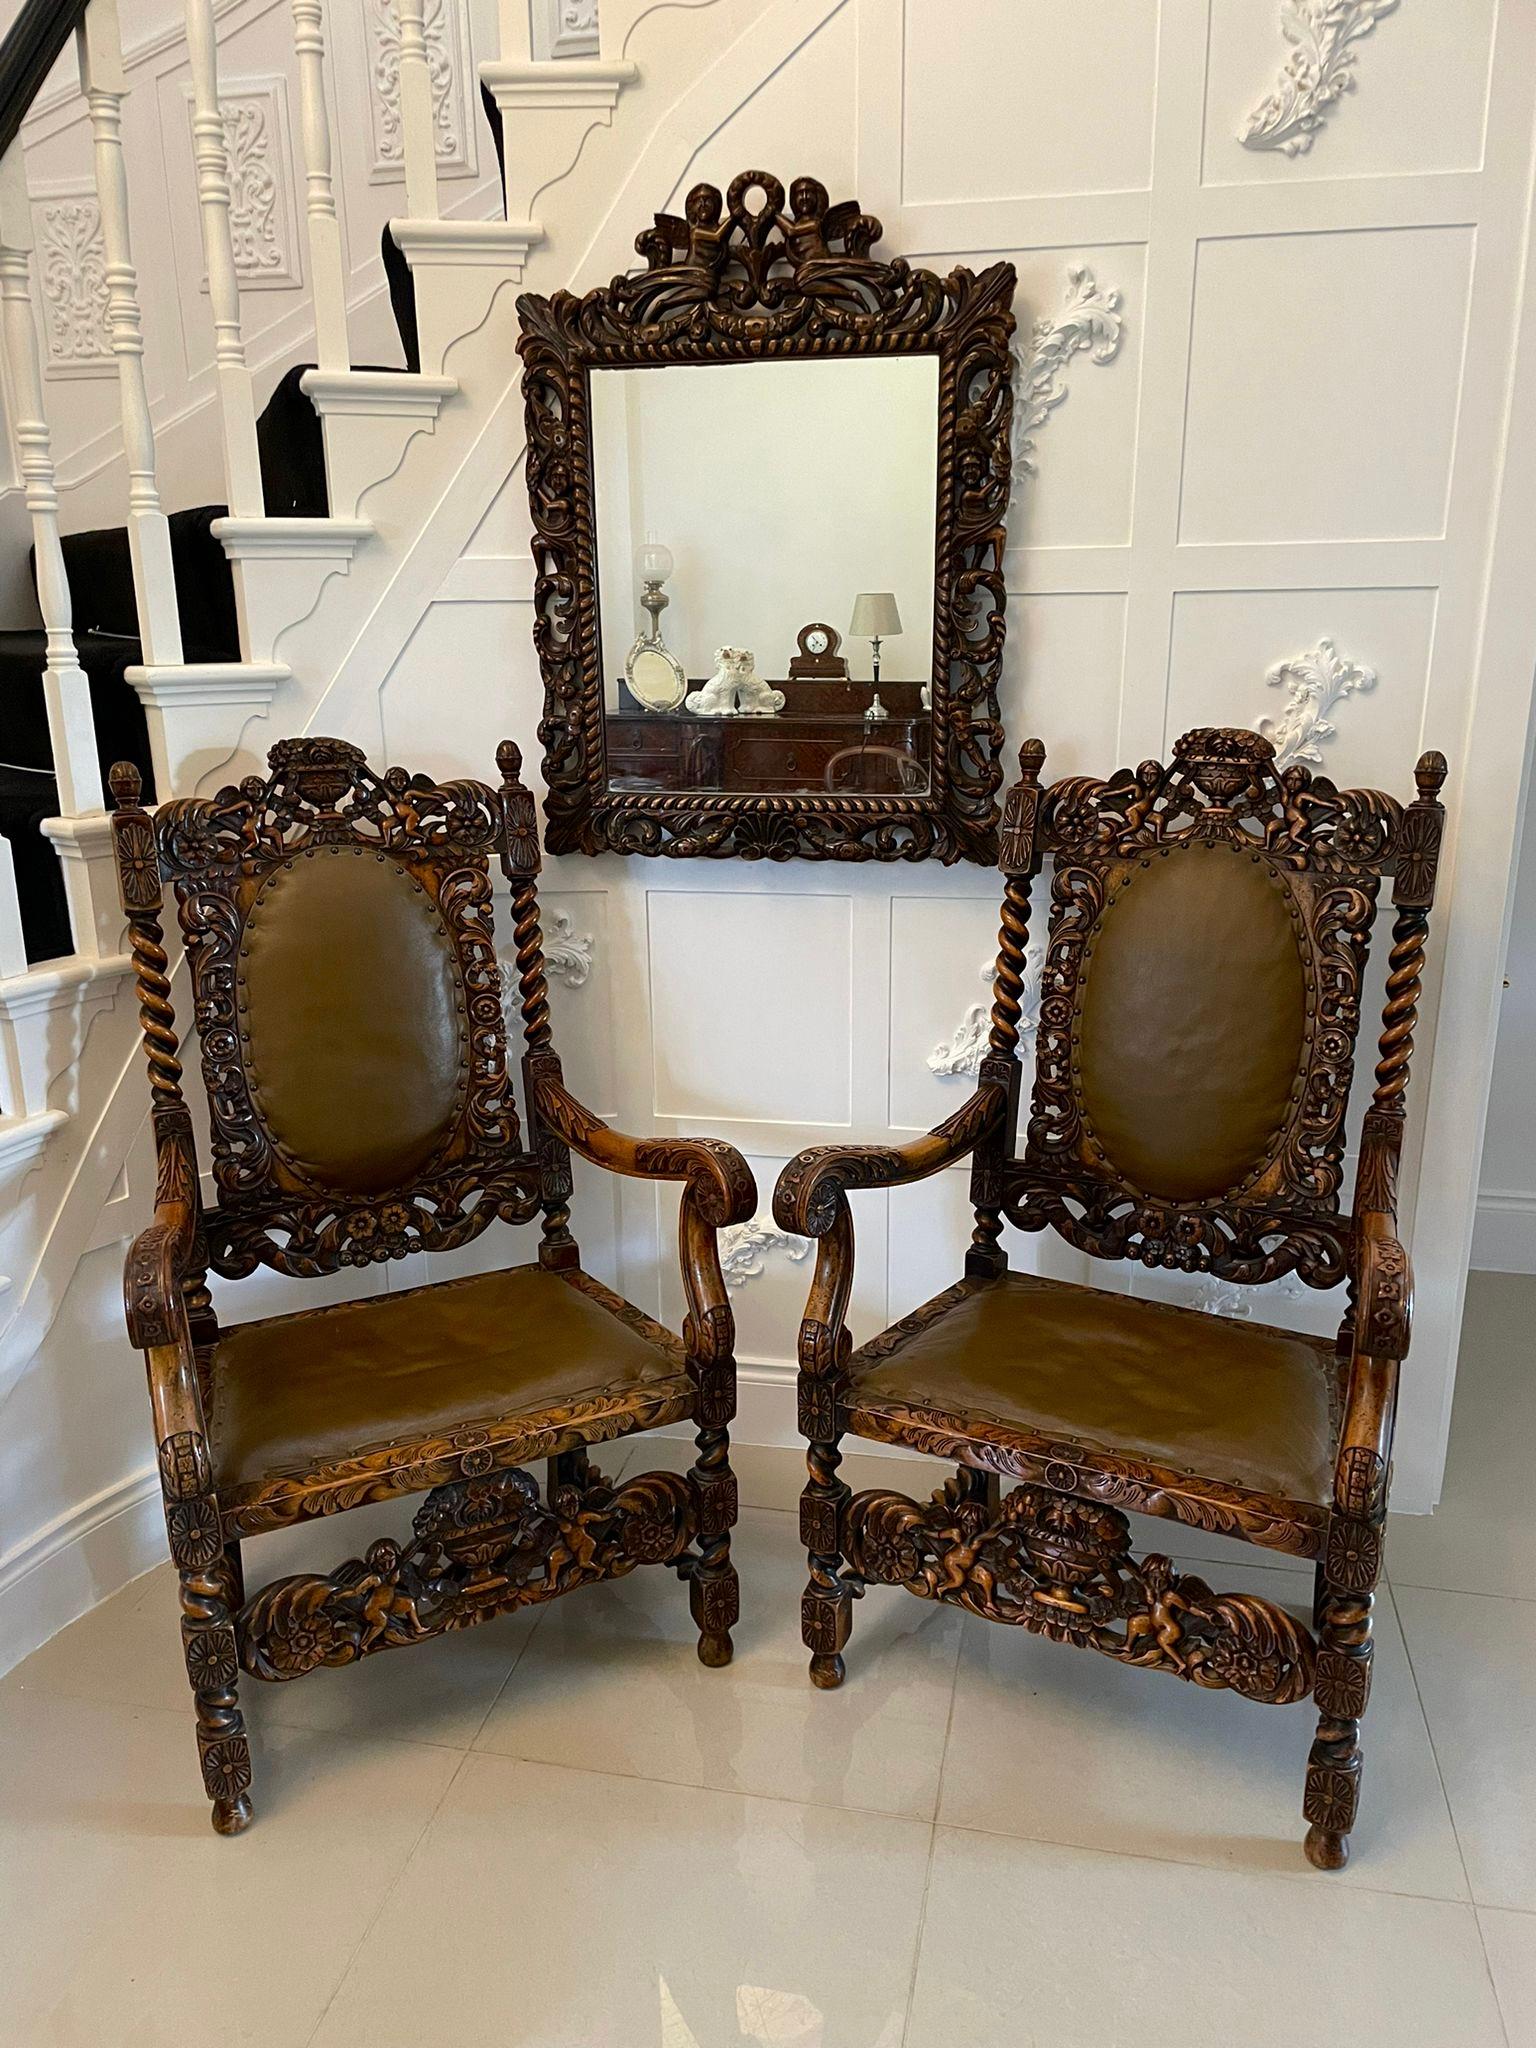 Outstanding quality large pair of antique Victorian carved walnut and leather armchairs having an outstanding quality carved back with a vase of flowers flanked by two cherubs scrolls and foliage, barley twist supports, shaped carved open arms with